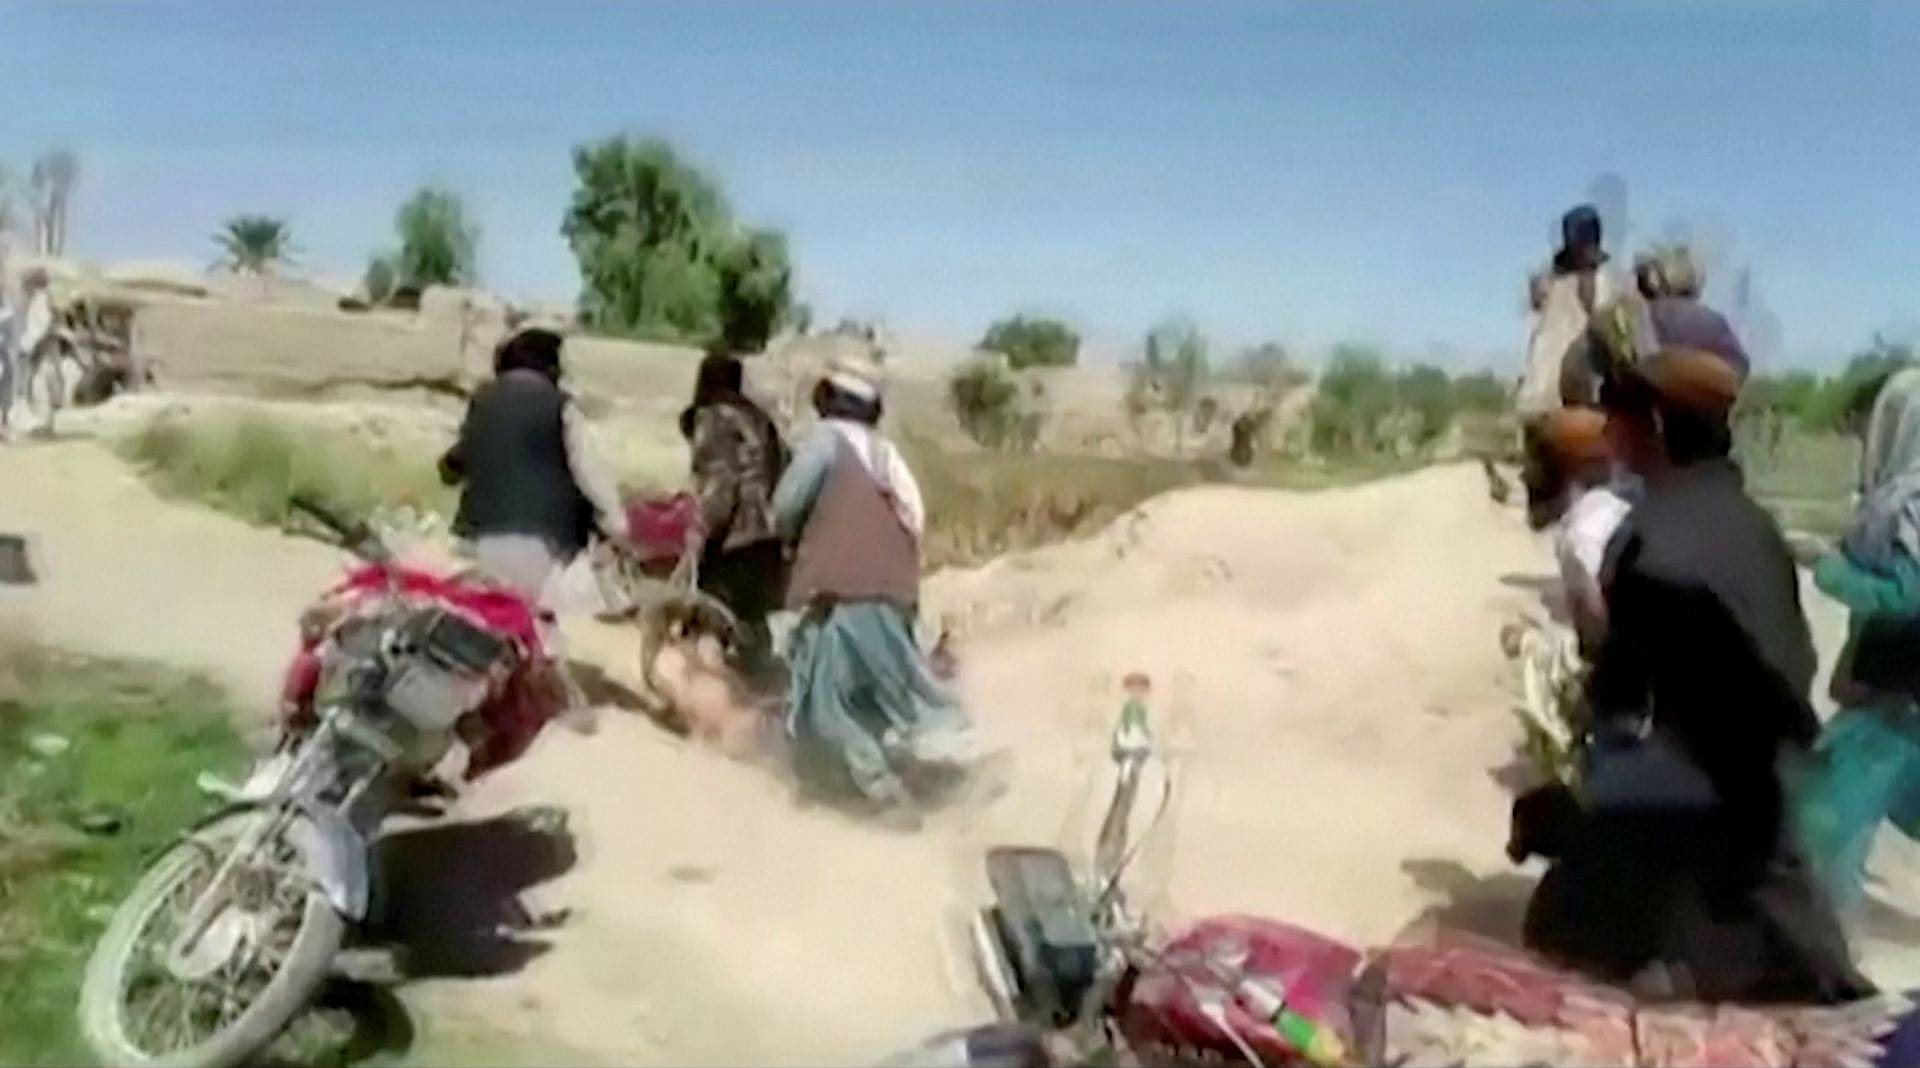 Men said to be Taliban fighters drag the body of a man on the ground at a location said to be Farah